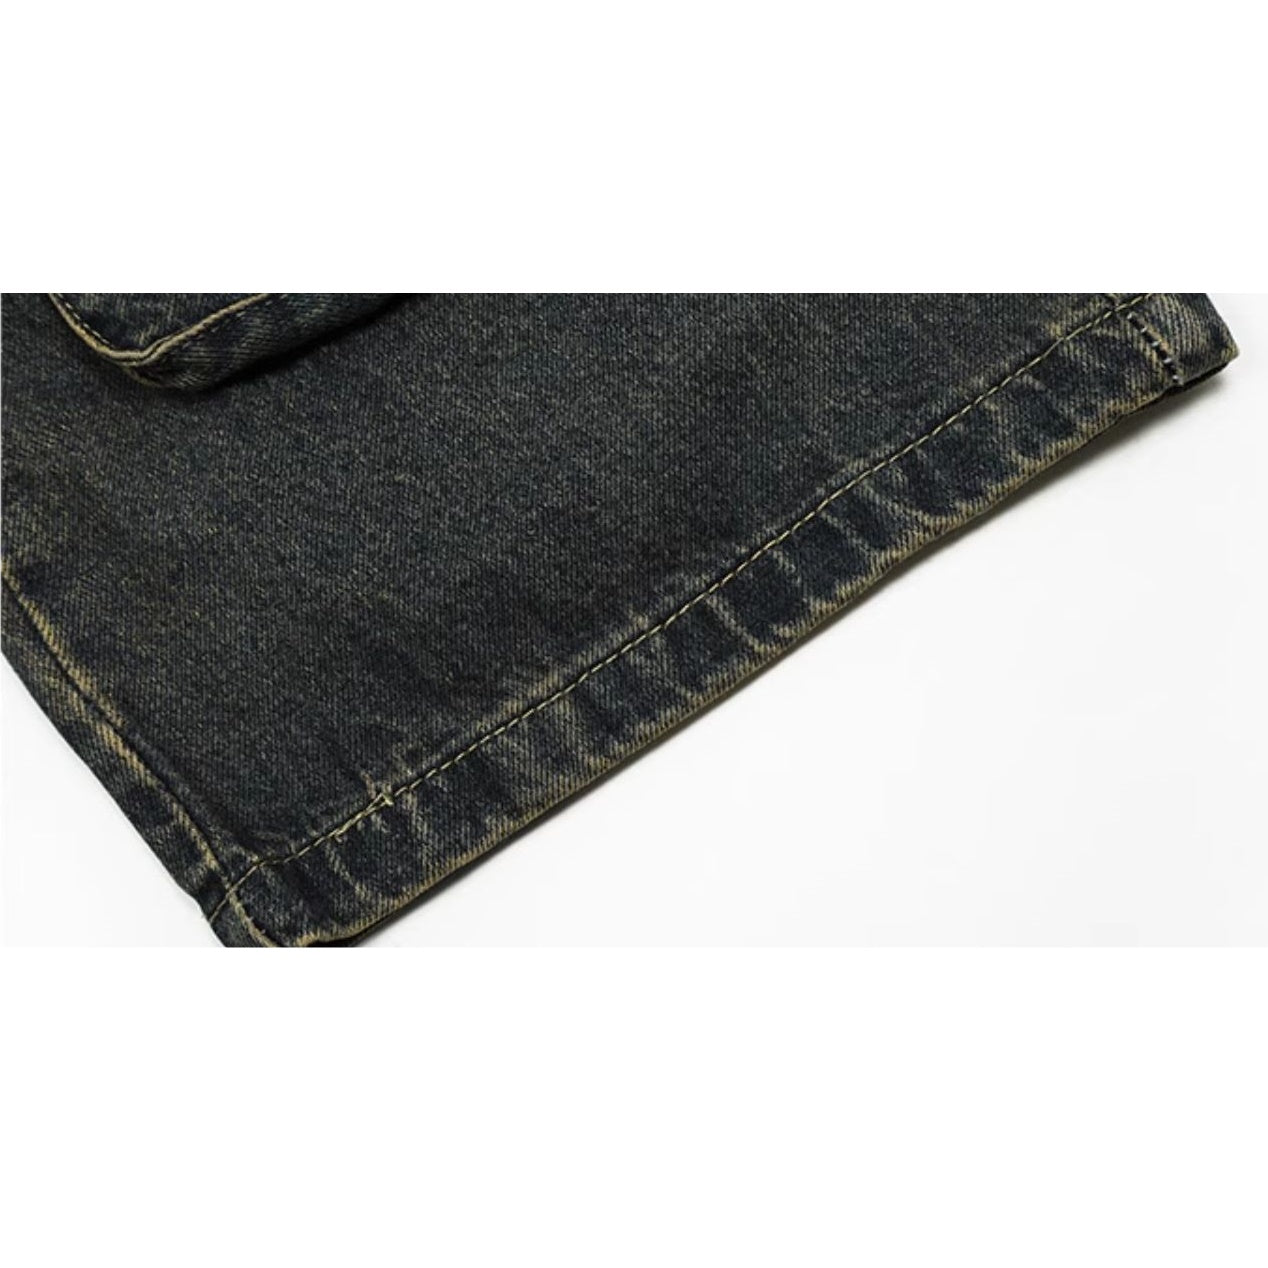 Strap Distressed Washed Multi-pocket Cargo Jeans MW9060